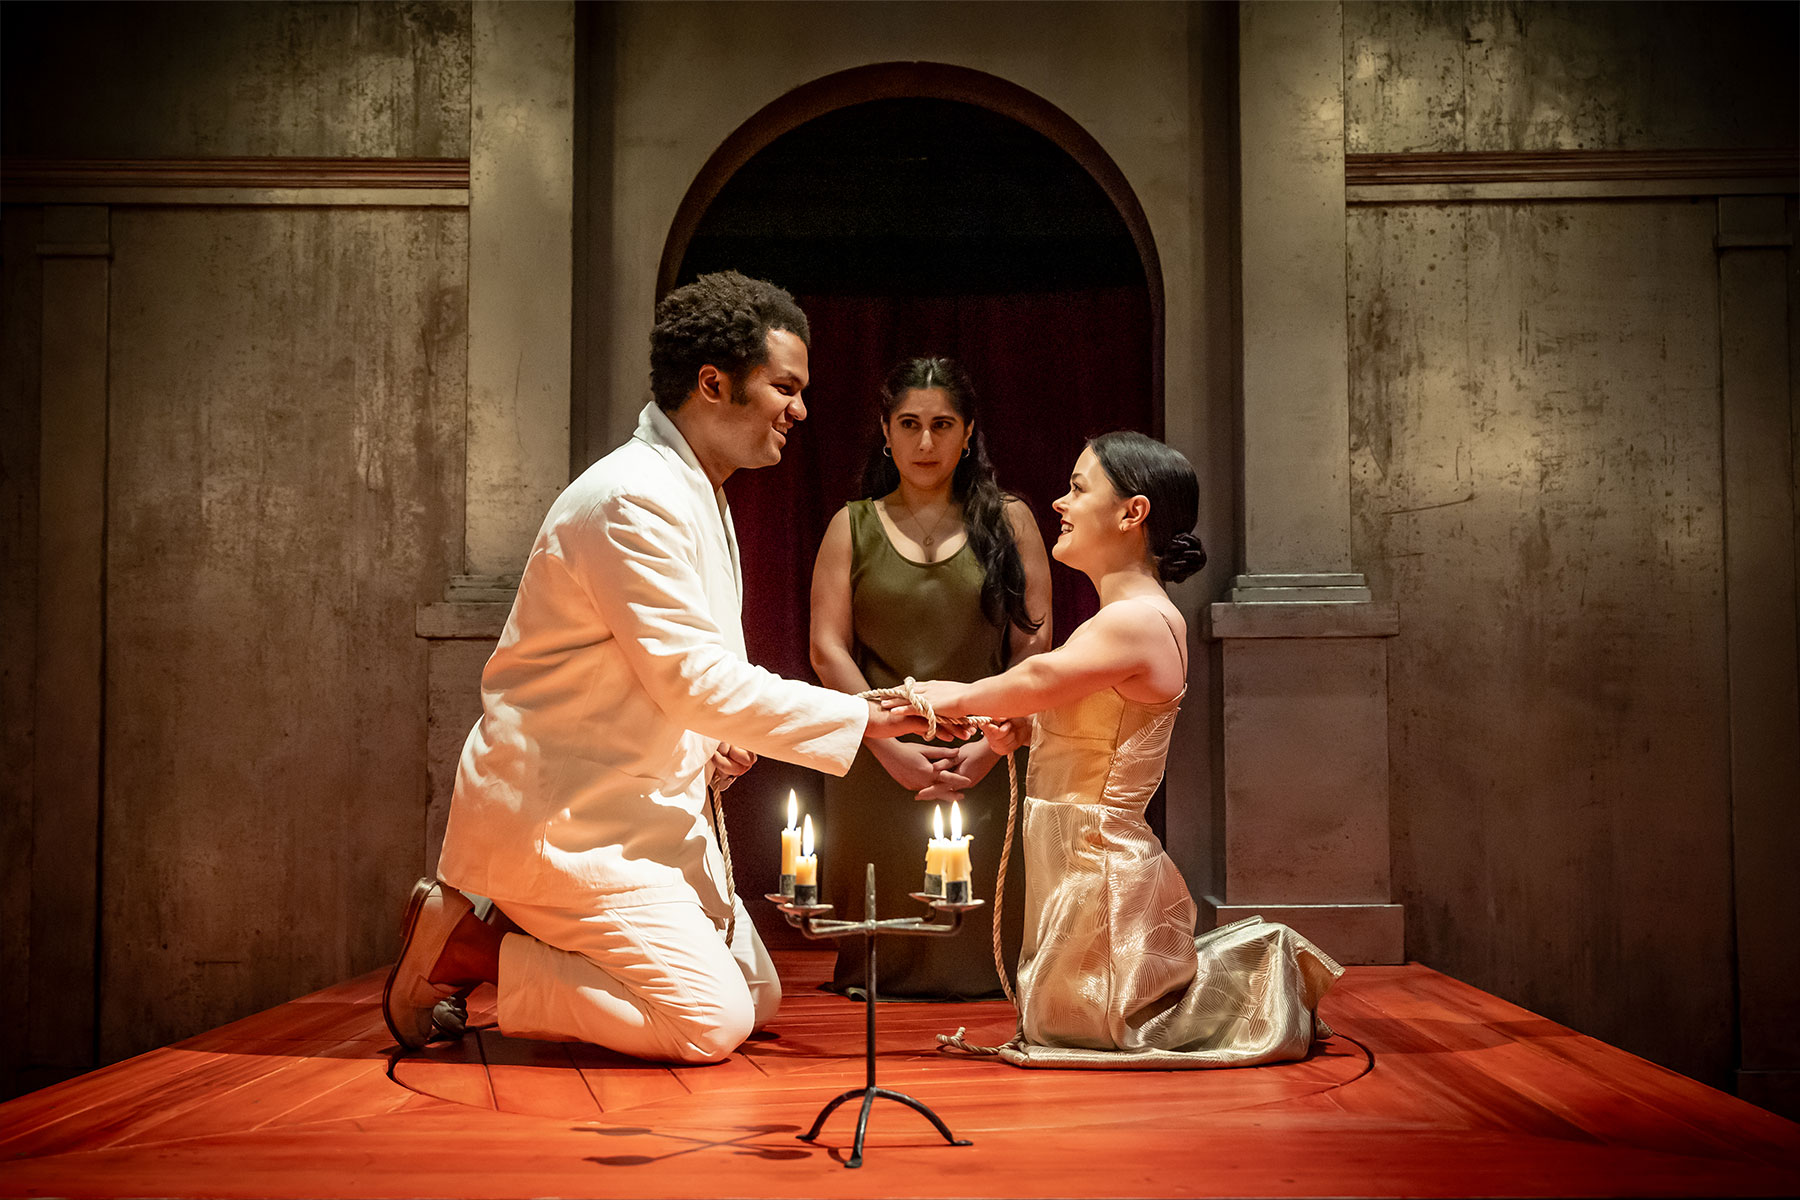 Olivier Huband, Shazia Nicholls and Francesca Mills in a scene from The Duchess of Malfi at the Sam Wanamaker Playhouse at Shakespeare's Globe